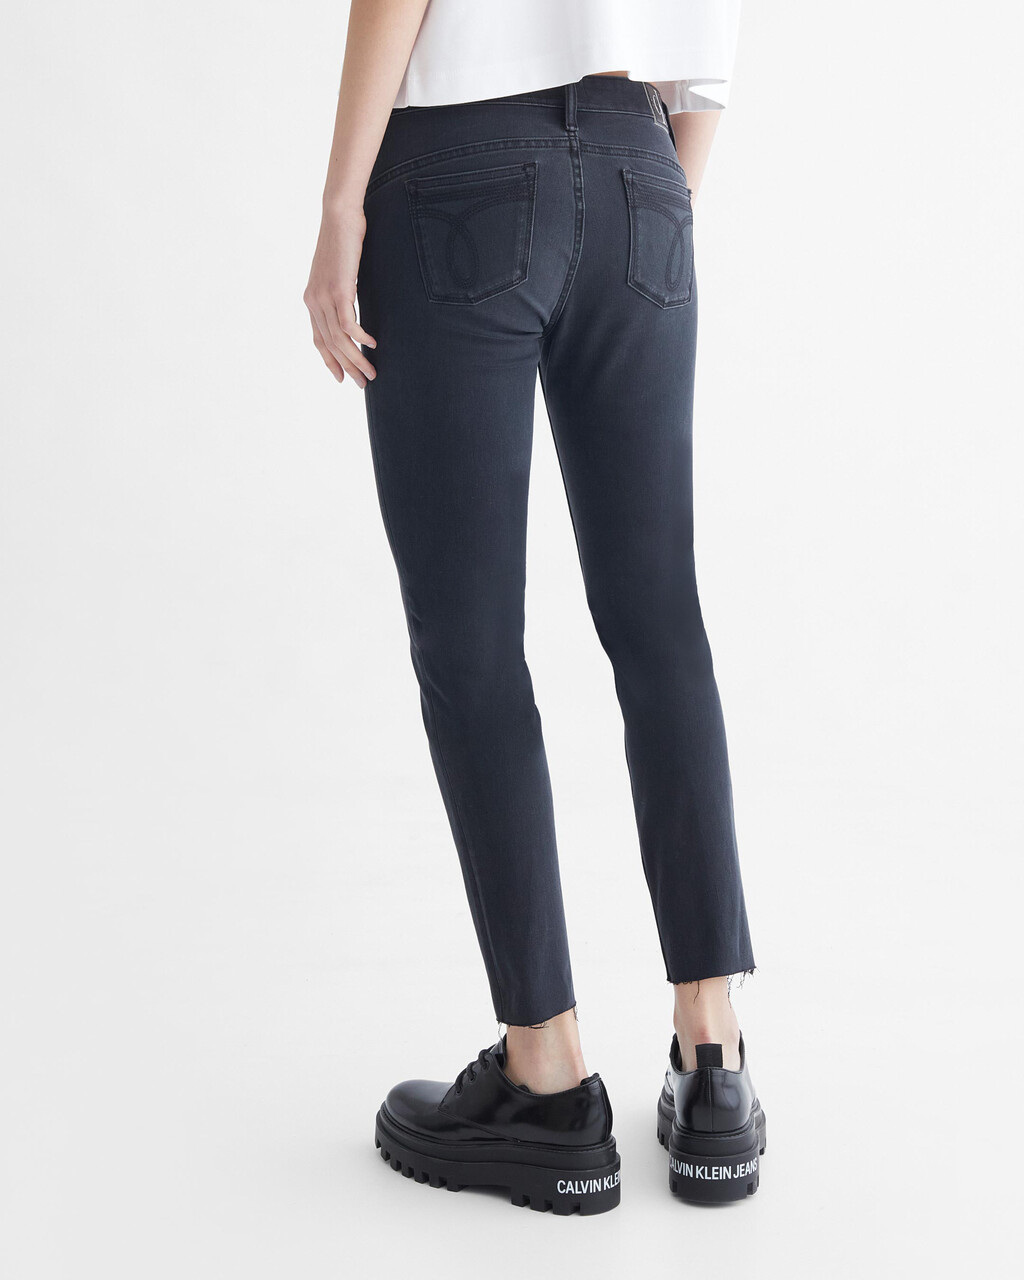 Ultimate Stretch Skinny Cropped Jeans, Washed Black Shanks Rwh, hi-res